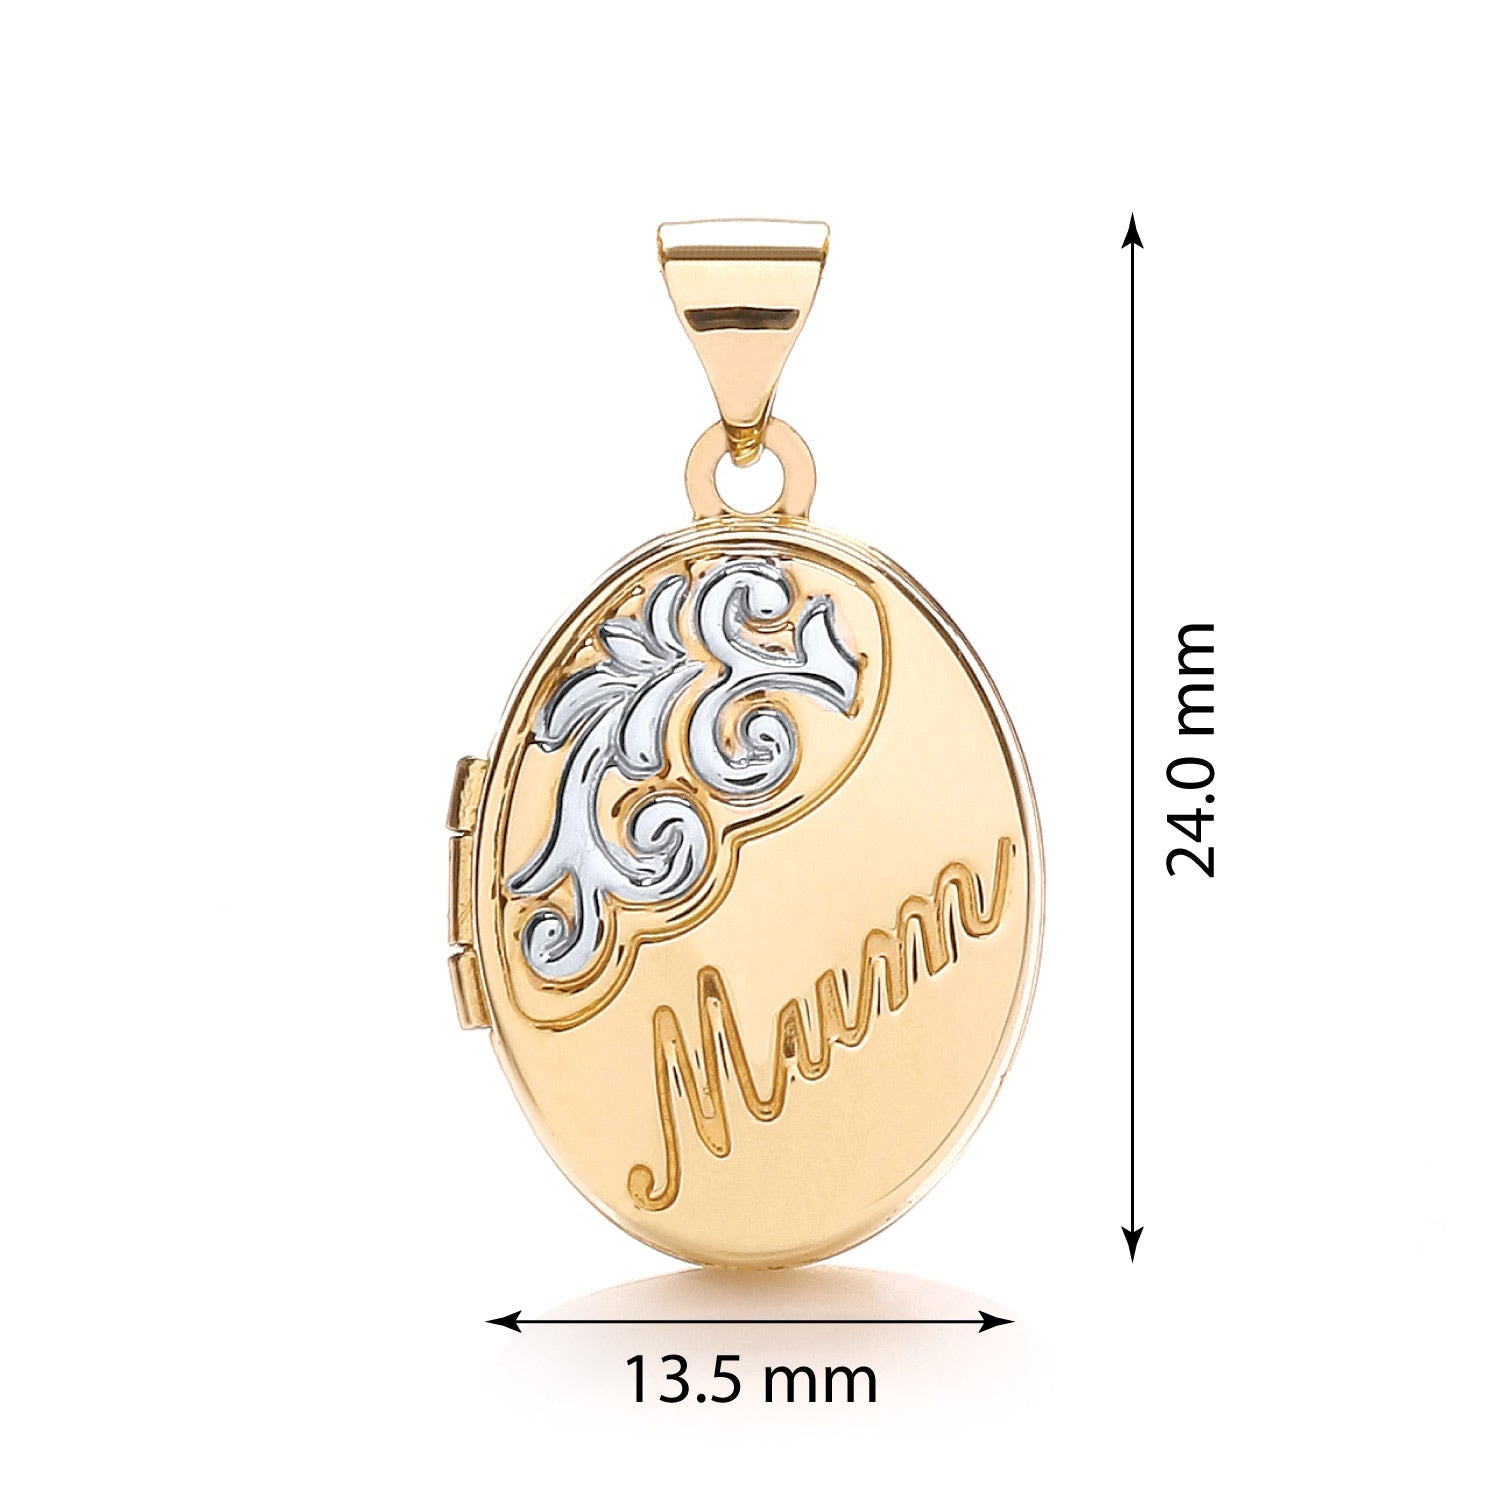 9ct Yellow and White Gold Oval Shaped Mum Locket - FJewellery